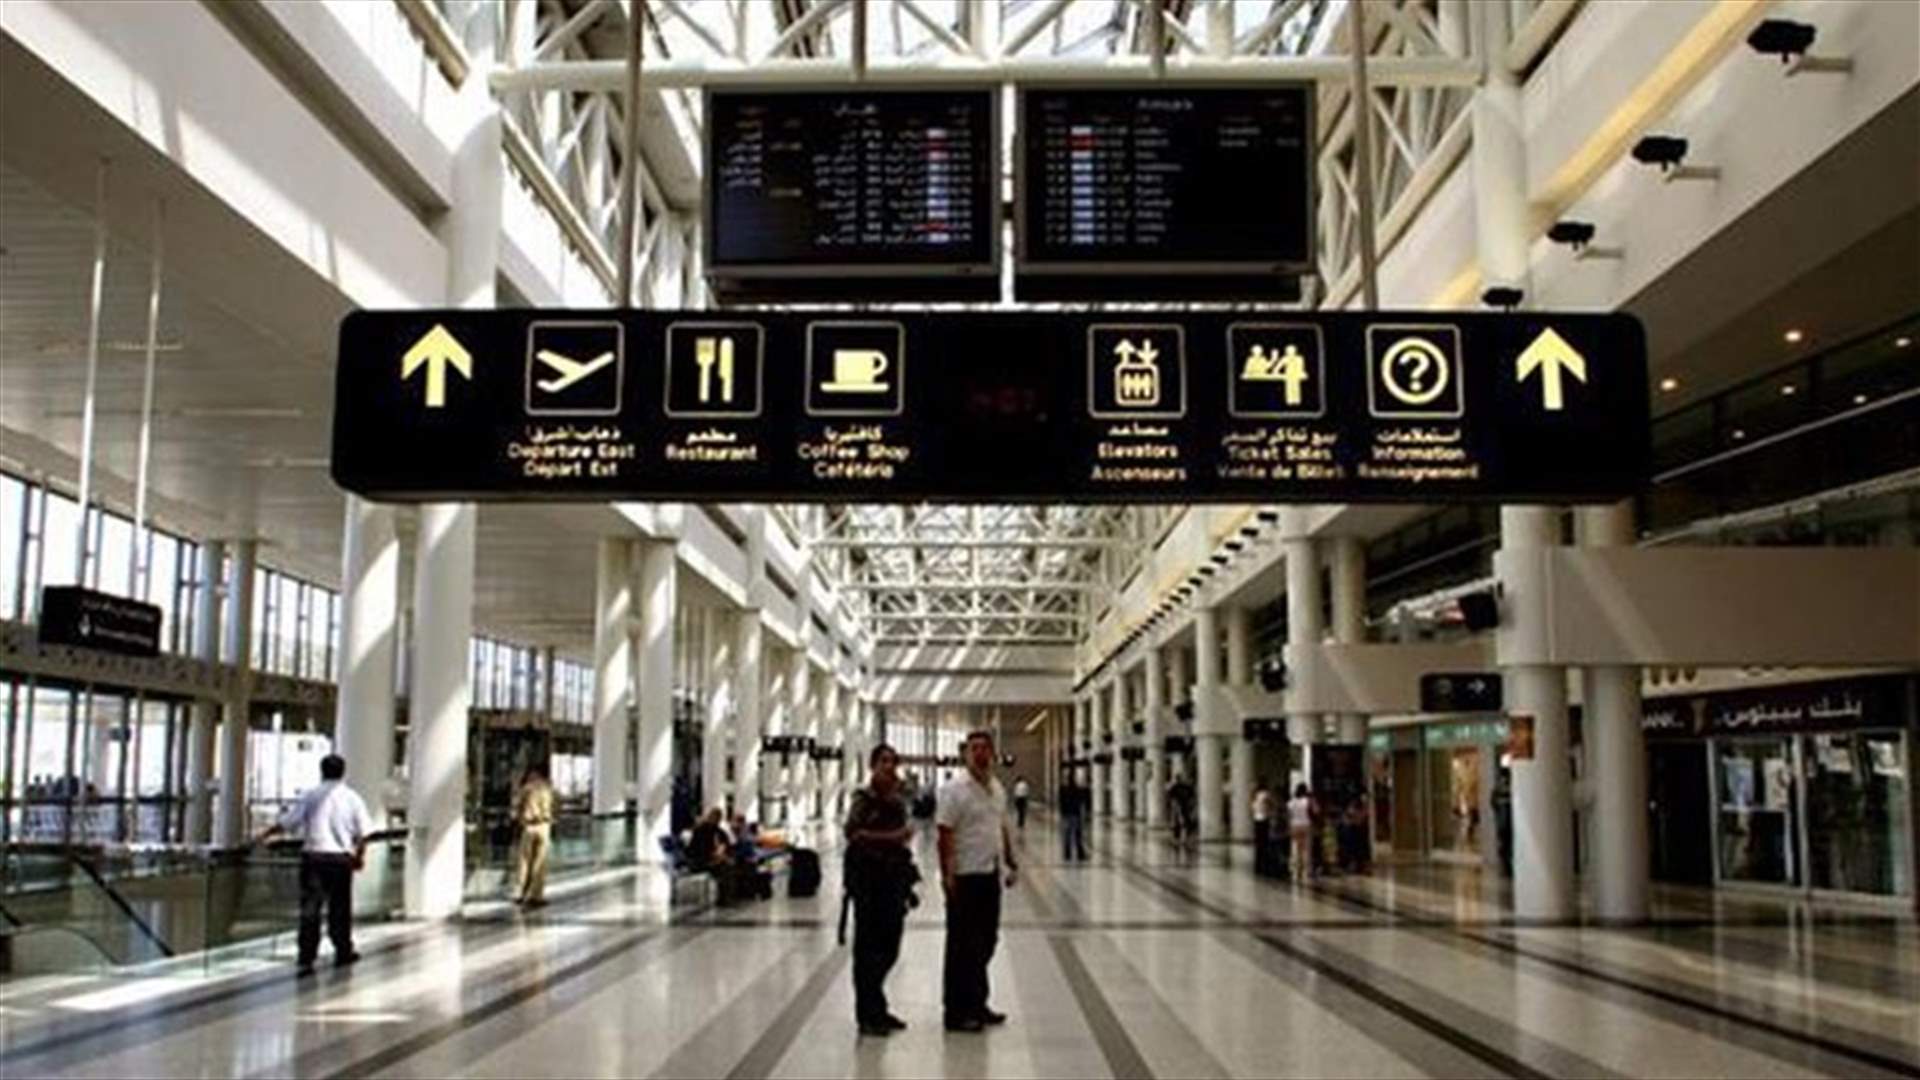 More than half a million passengers passed through Beirut airport